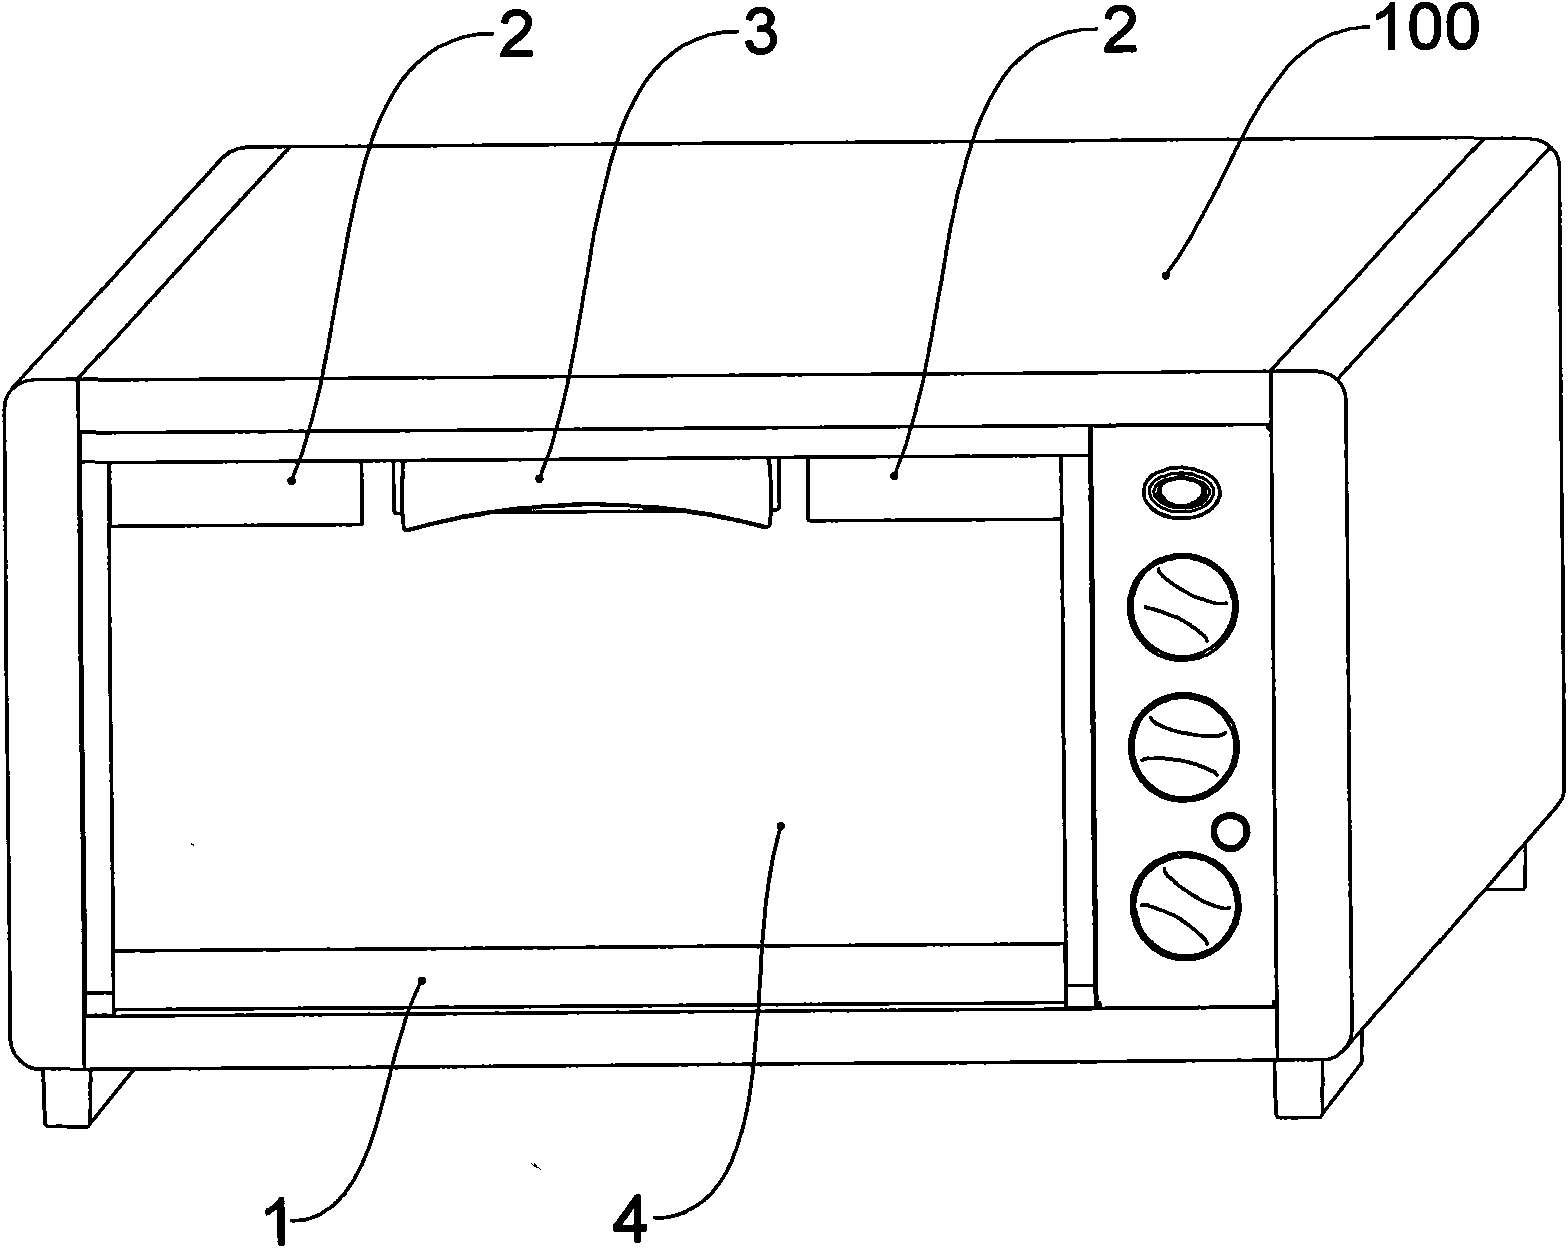 Open and close door of electric oven